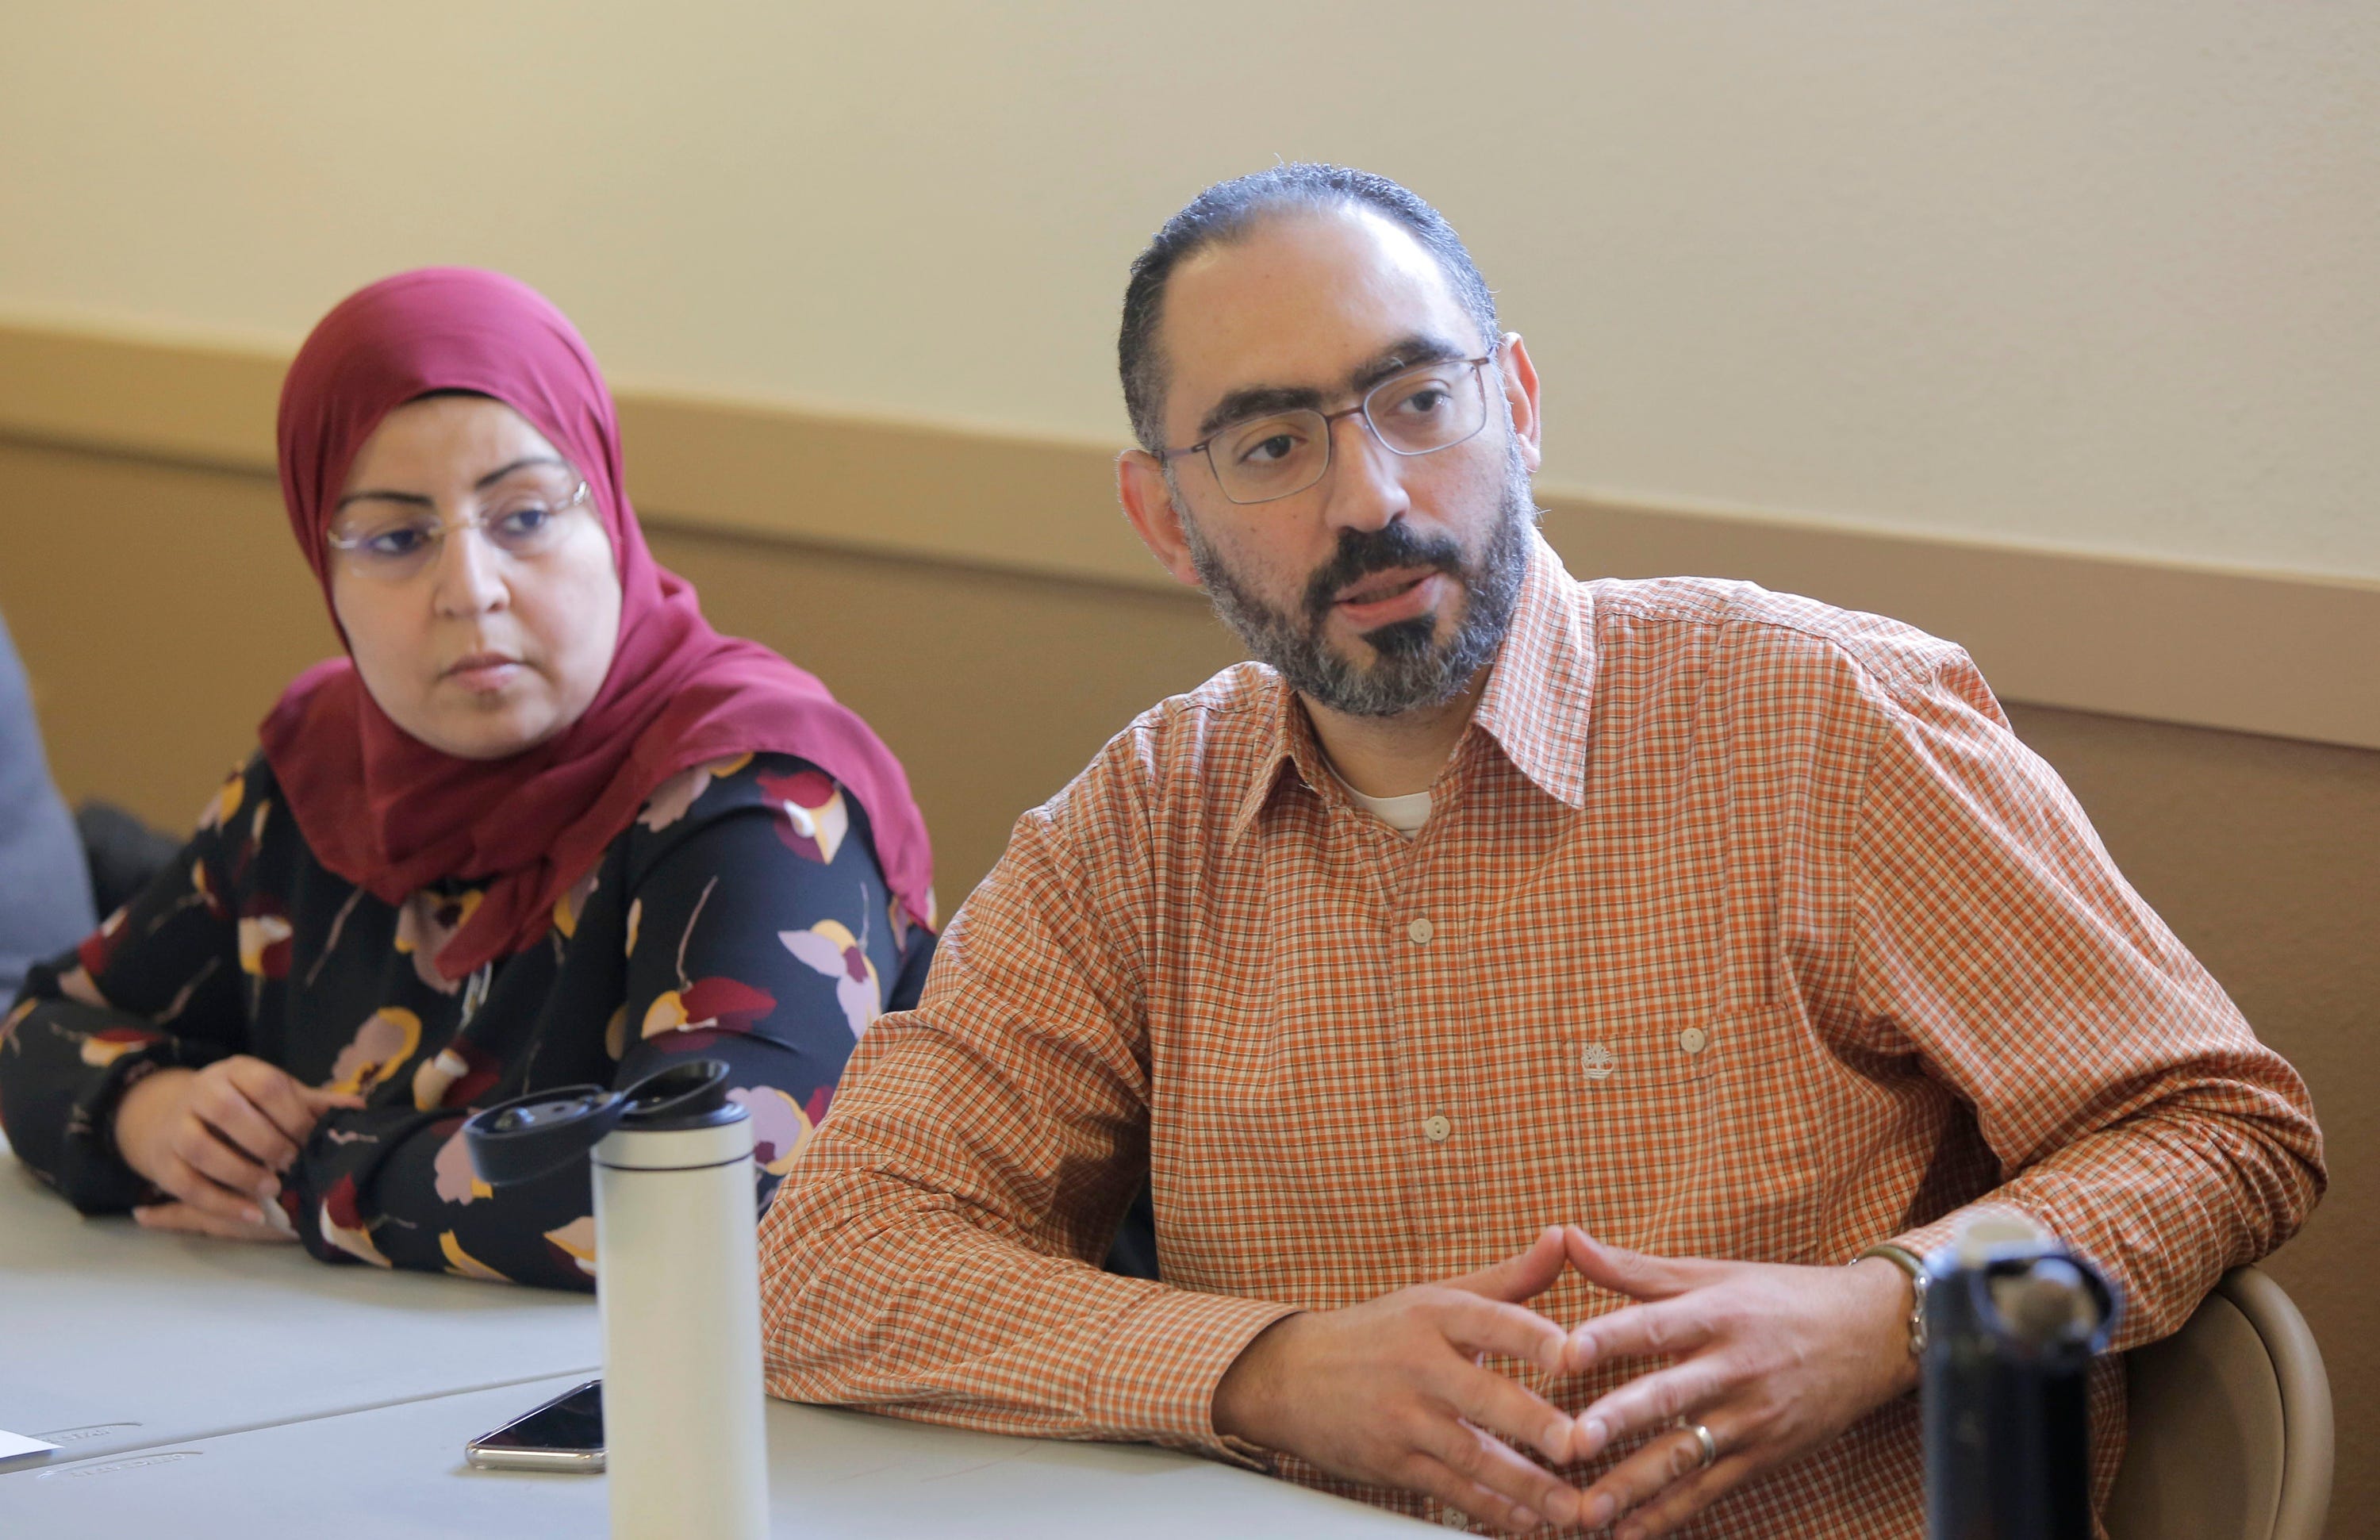 Ahmed and Dalia Abdelnaby at the Islamic Center of Boise in February 2019. Ahmed Abdelnaby calls the American Laws for American Courts bill "a solution looking for a problem."